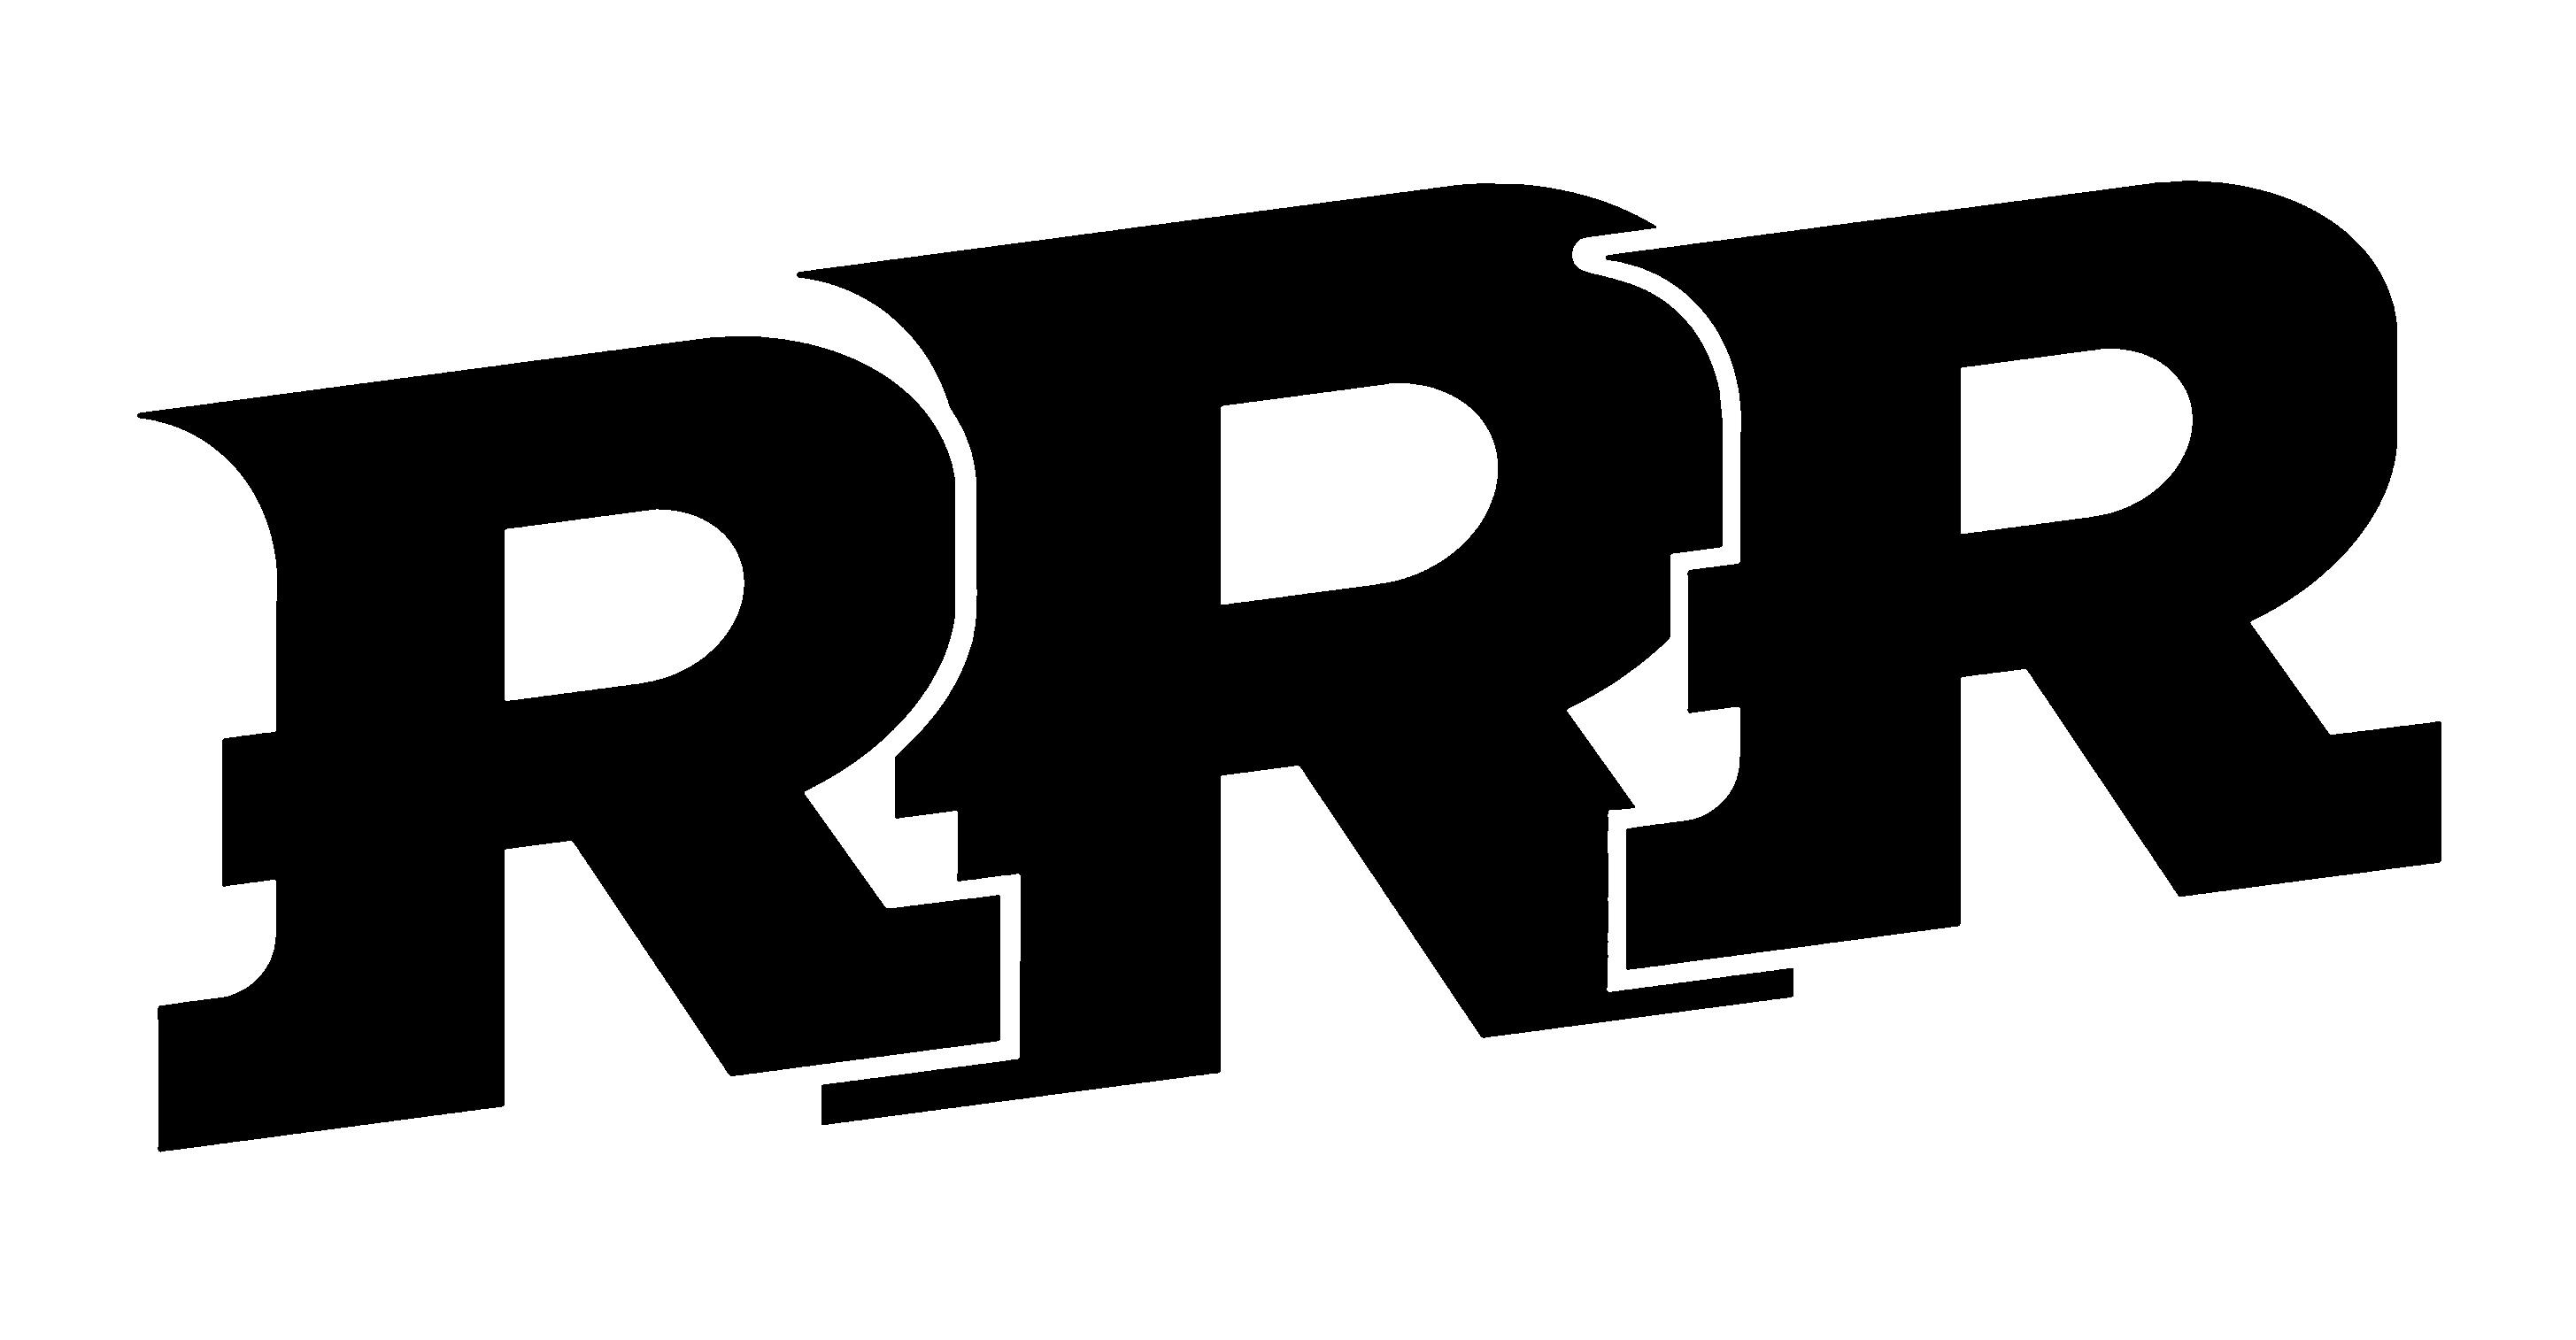 The strength of 'RRR' is its message – Old Gold & Black